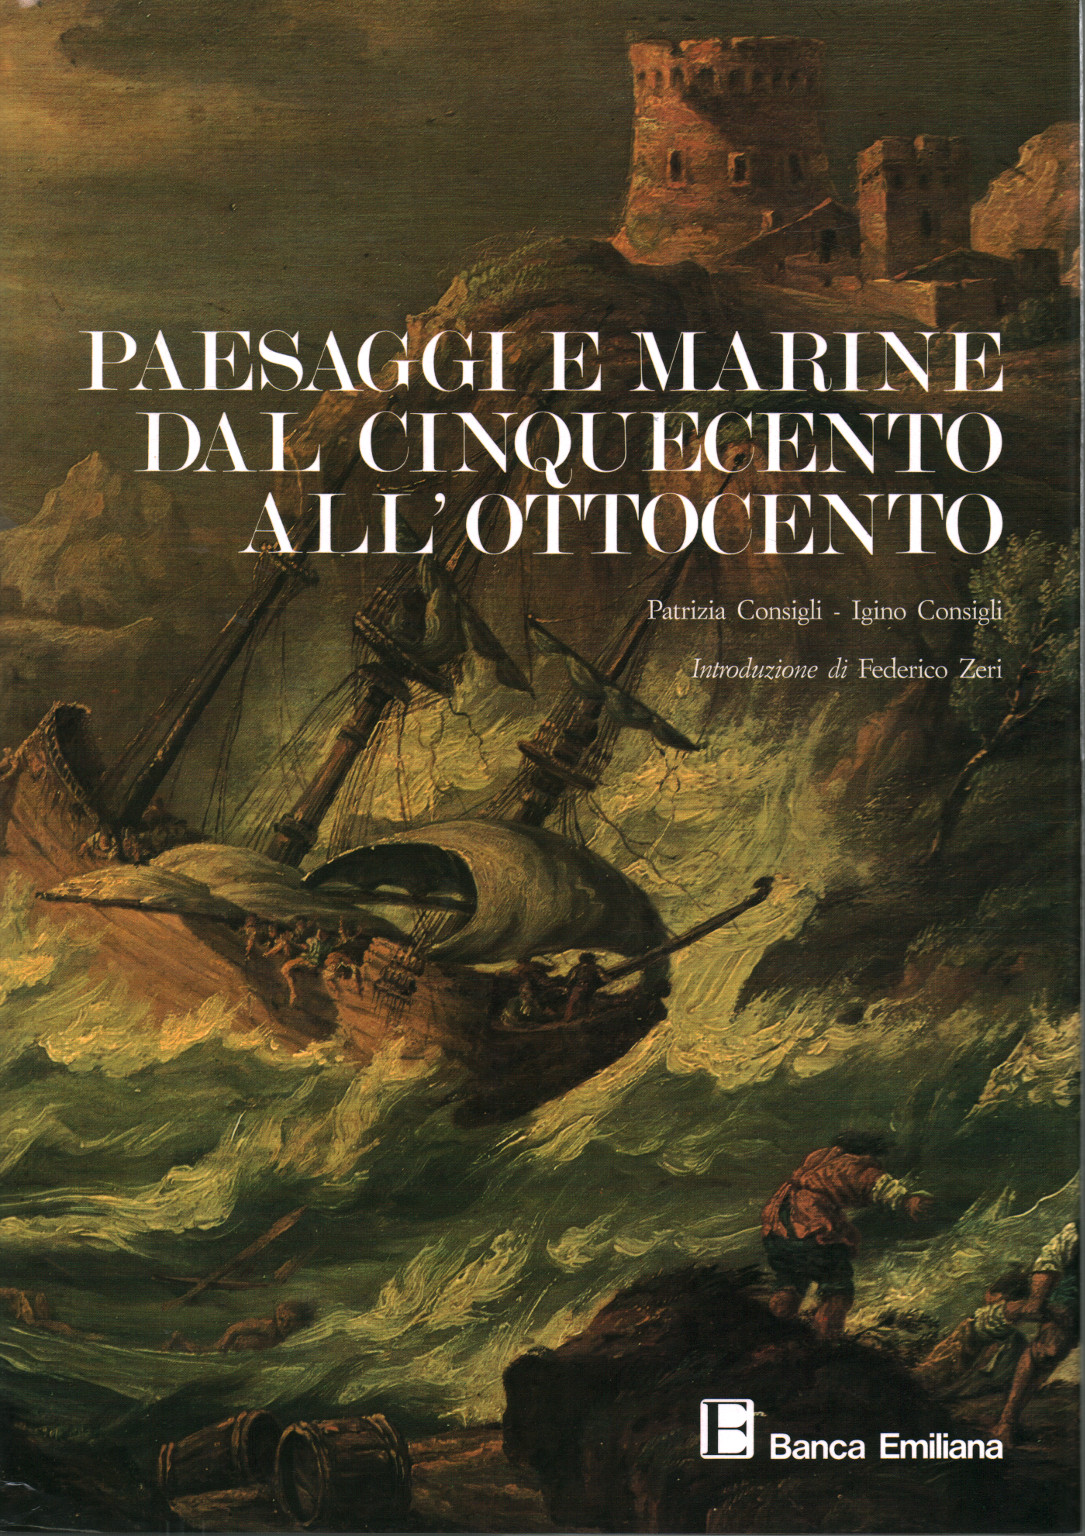 Landscapes and seascapes from the sixteenth century to the present century